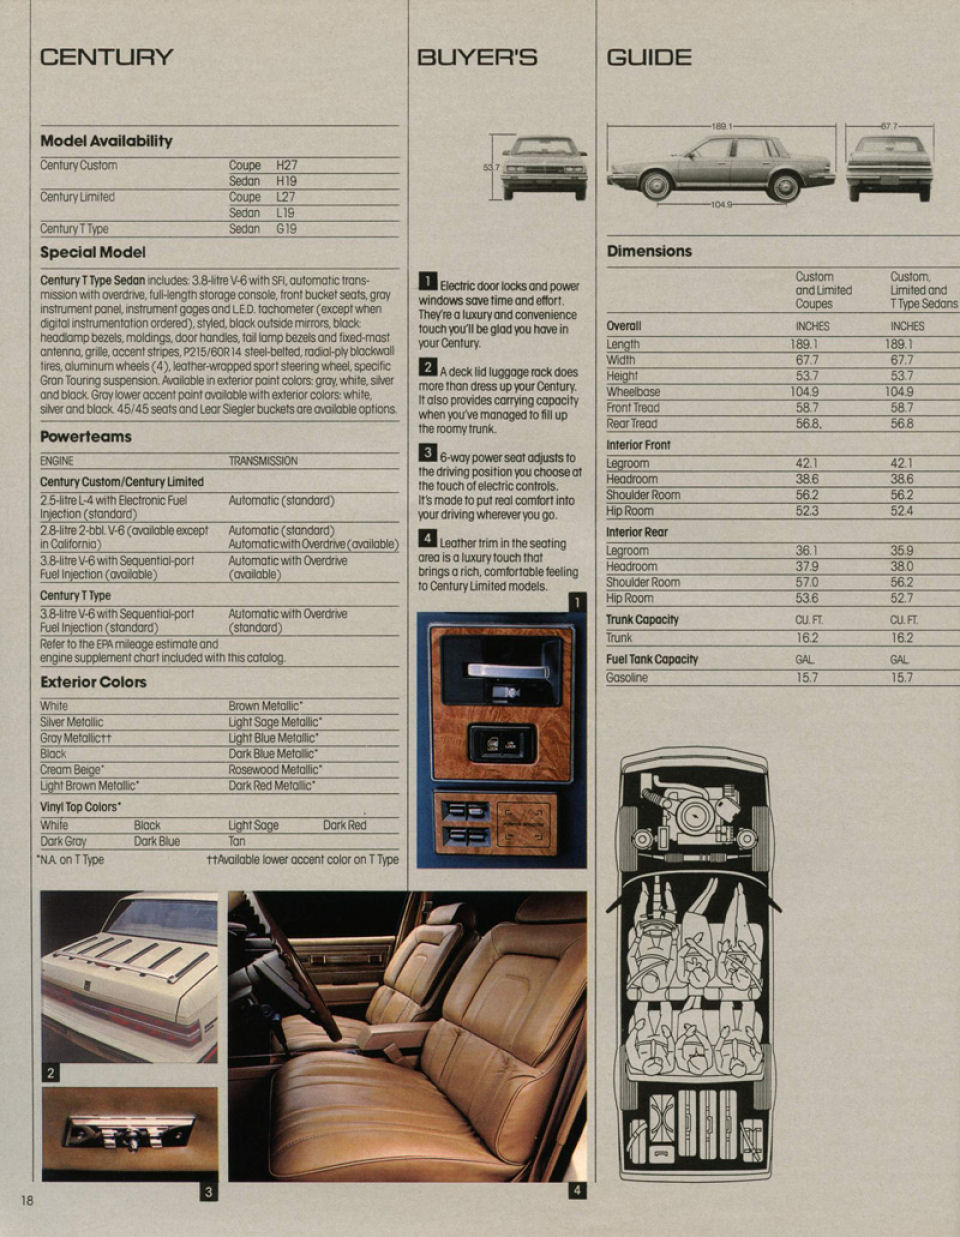 1986 Buick Buyers Guide-18